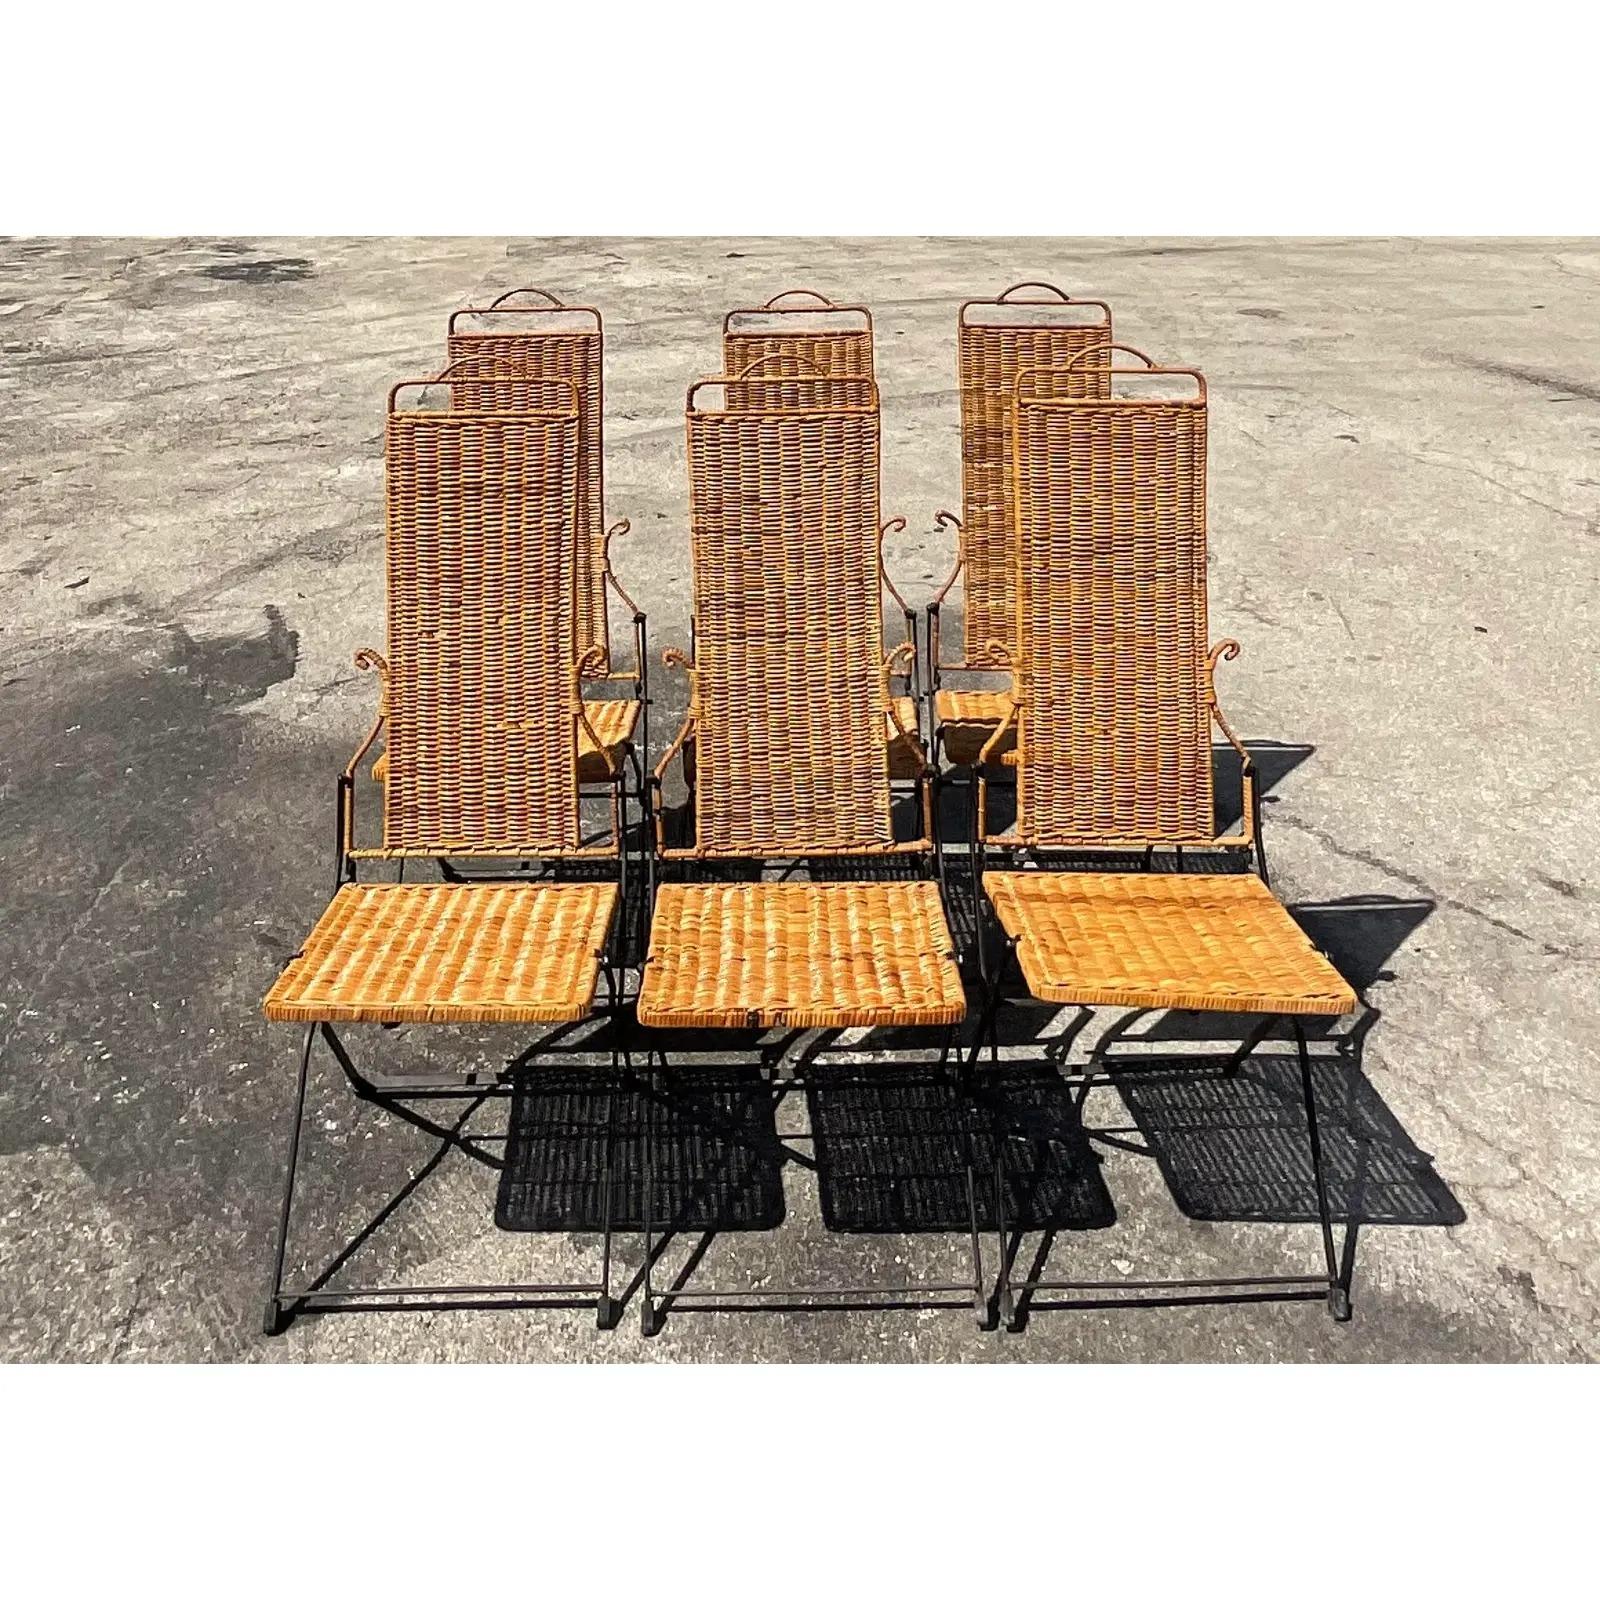 Fantastic set of 6 vintage Coastal dining chairs. Beautiful woven rattan on a sleek metal frame. Chic Midcentury details to the design. Great for indoors or outside in a covered area. Acquired from a Miami estate.